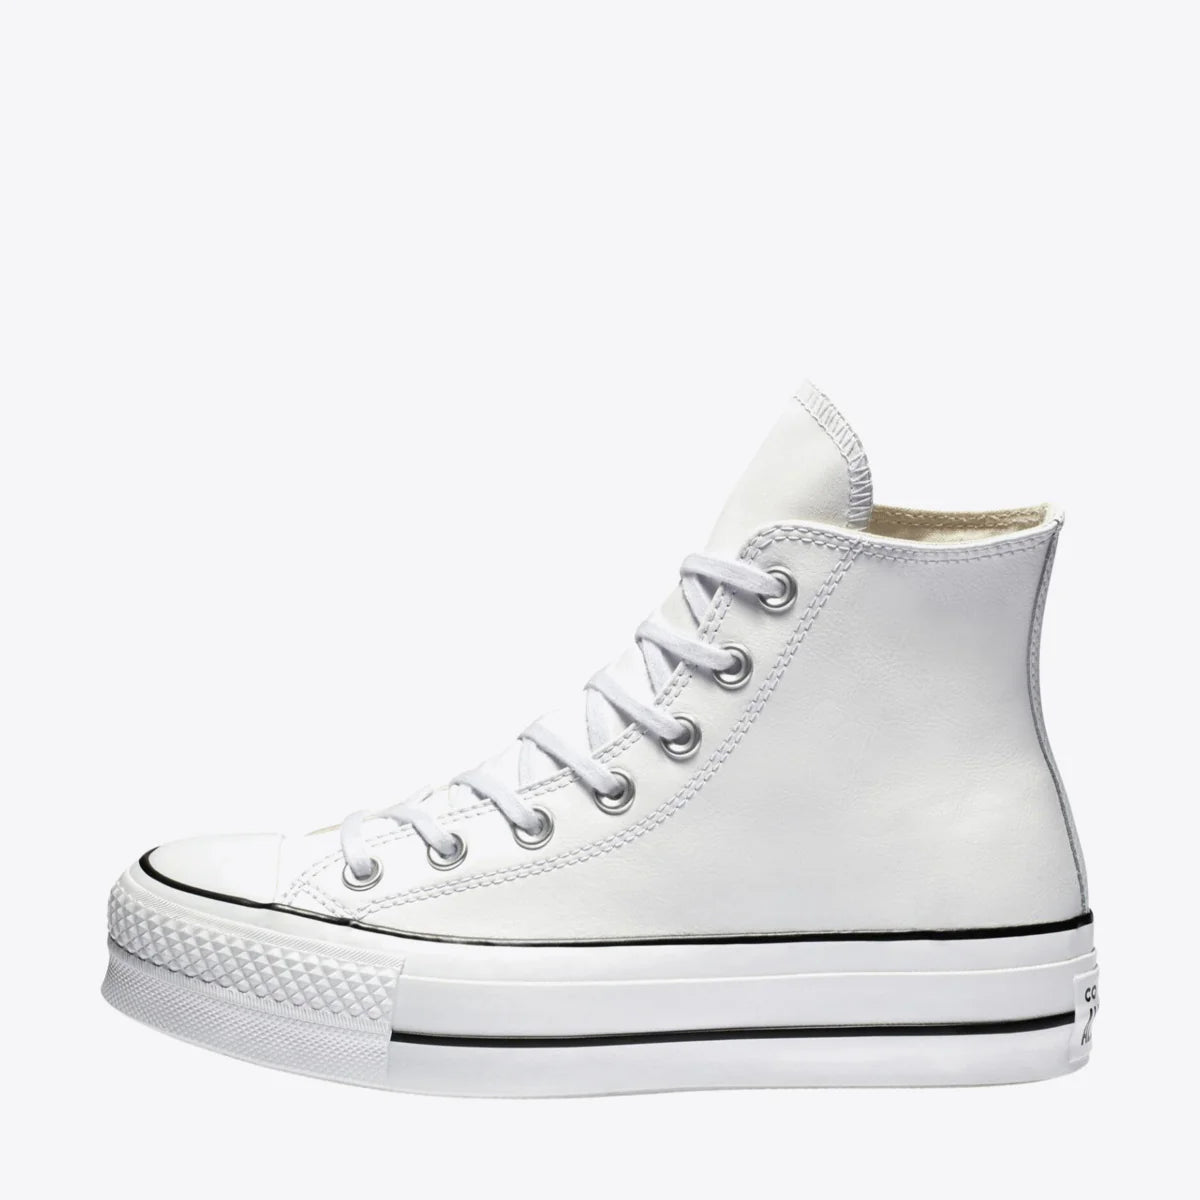 .CONVERSE CHUCK TAYLOR ALL STAR LIFT WHITE LEATHER HIGH TOP - (561676C)- LBW - R1L7